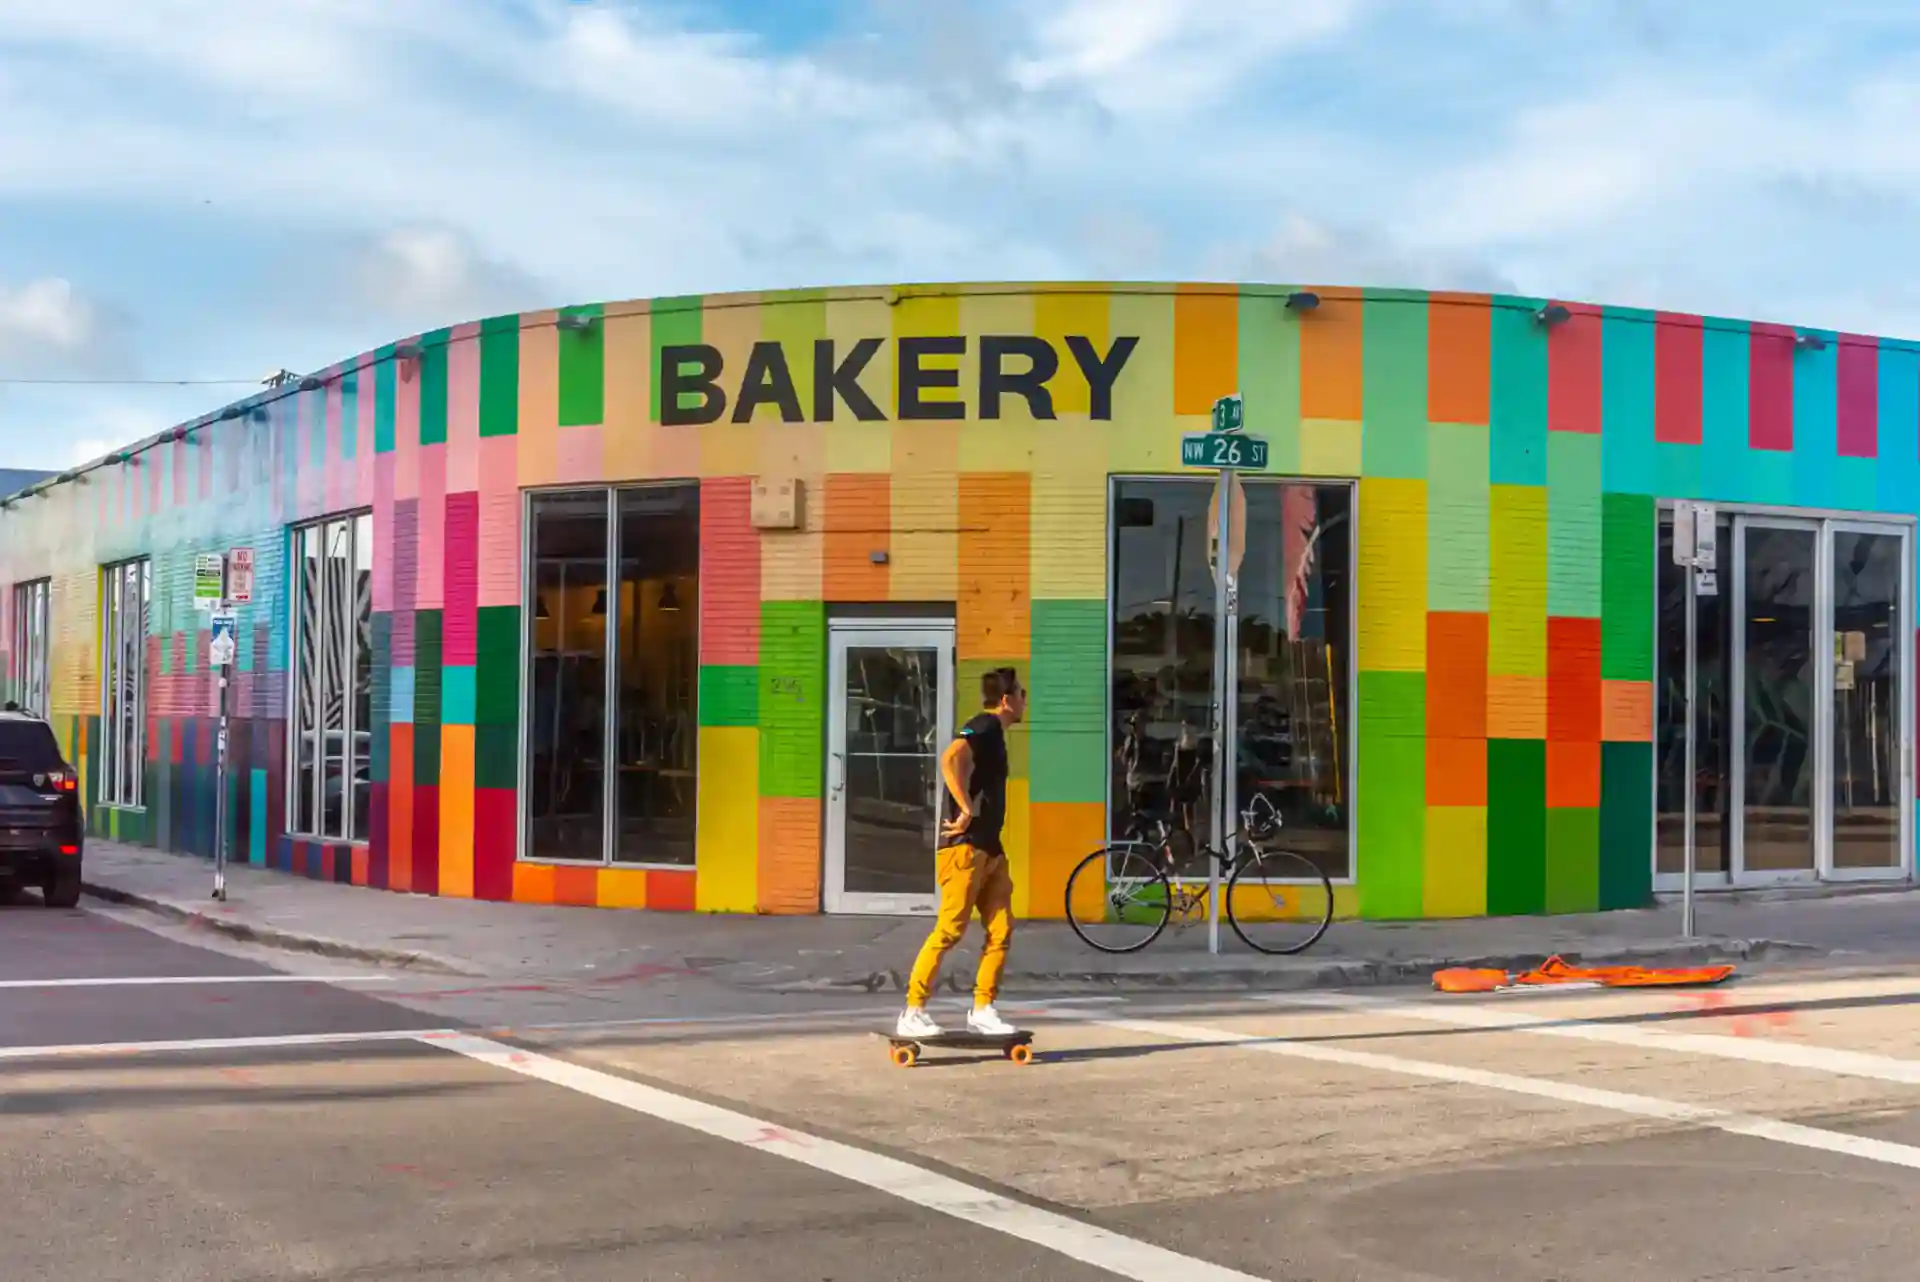 The exterior entrance of the bakery is painted with a vibrant array of colors, adding a lively and eye-catching touch.